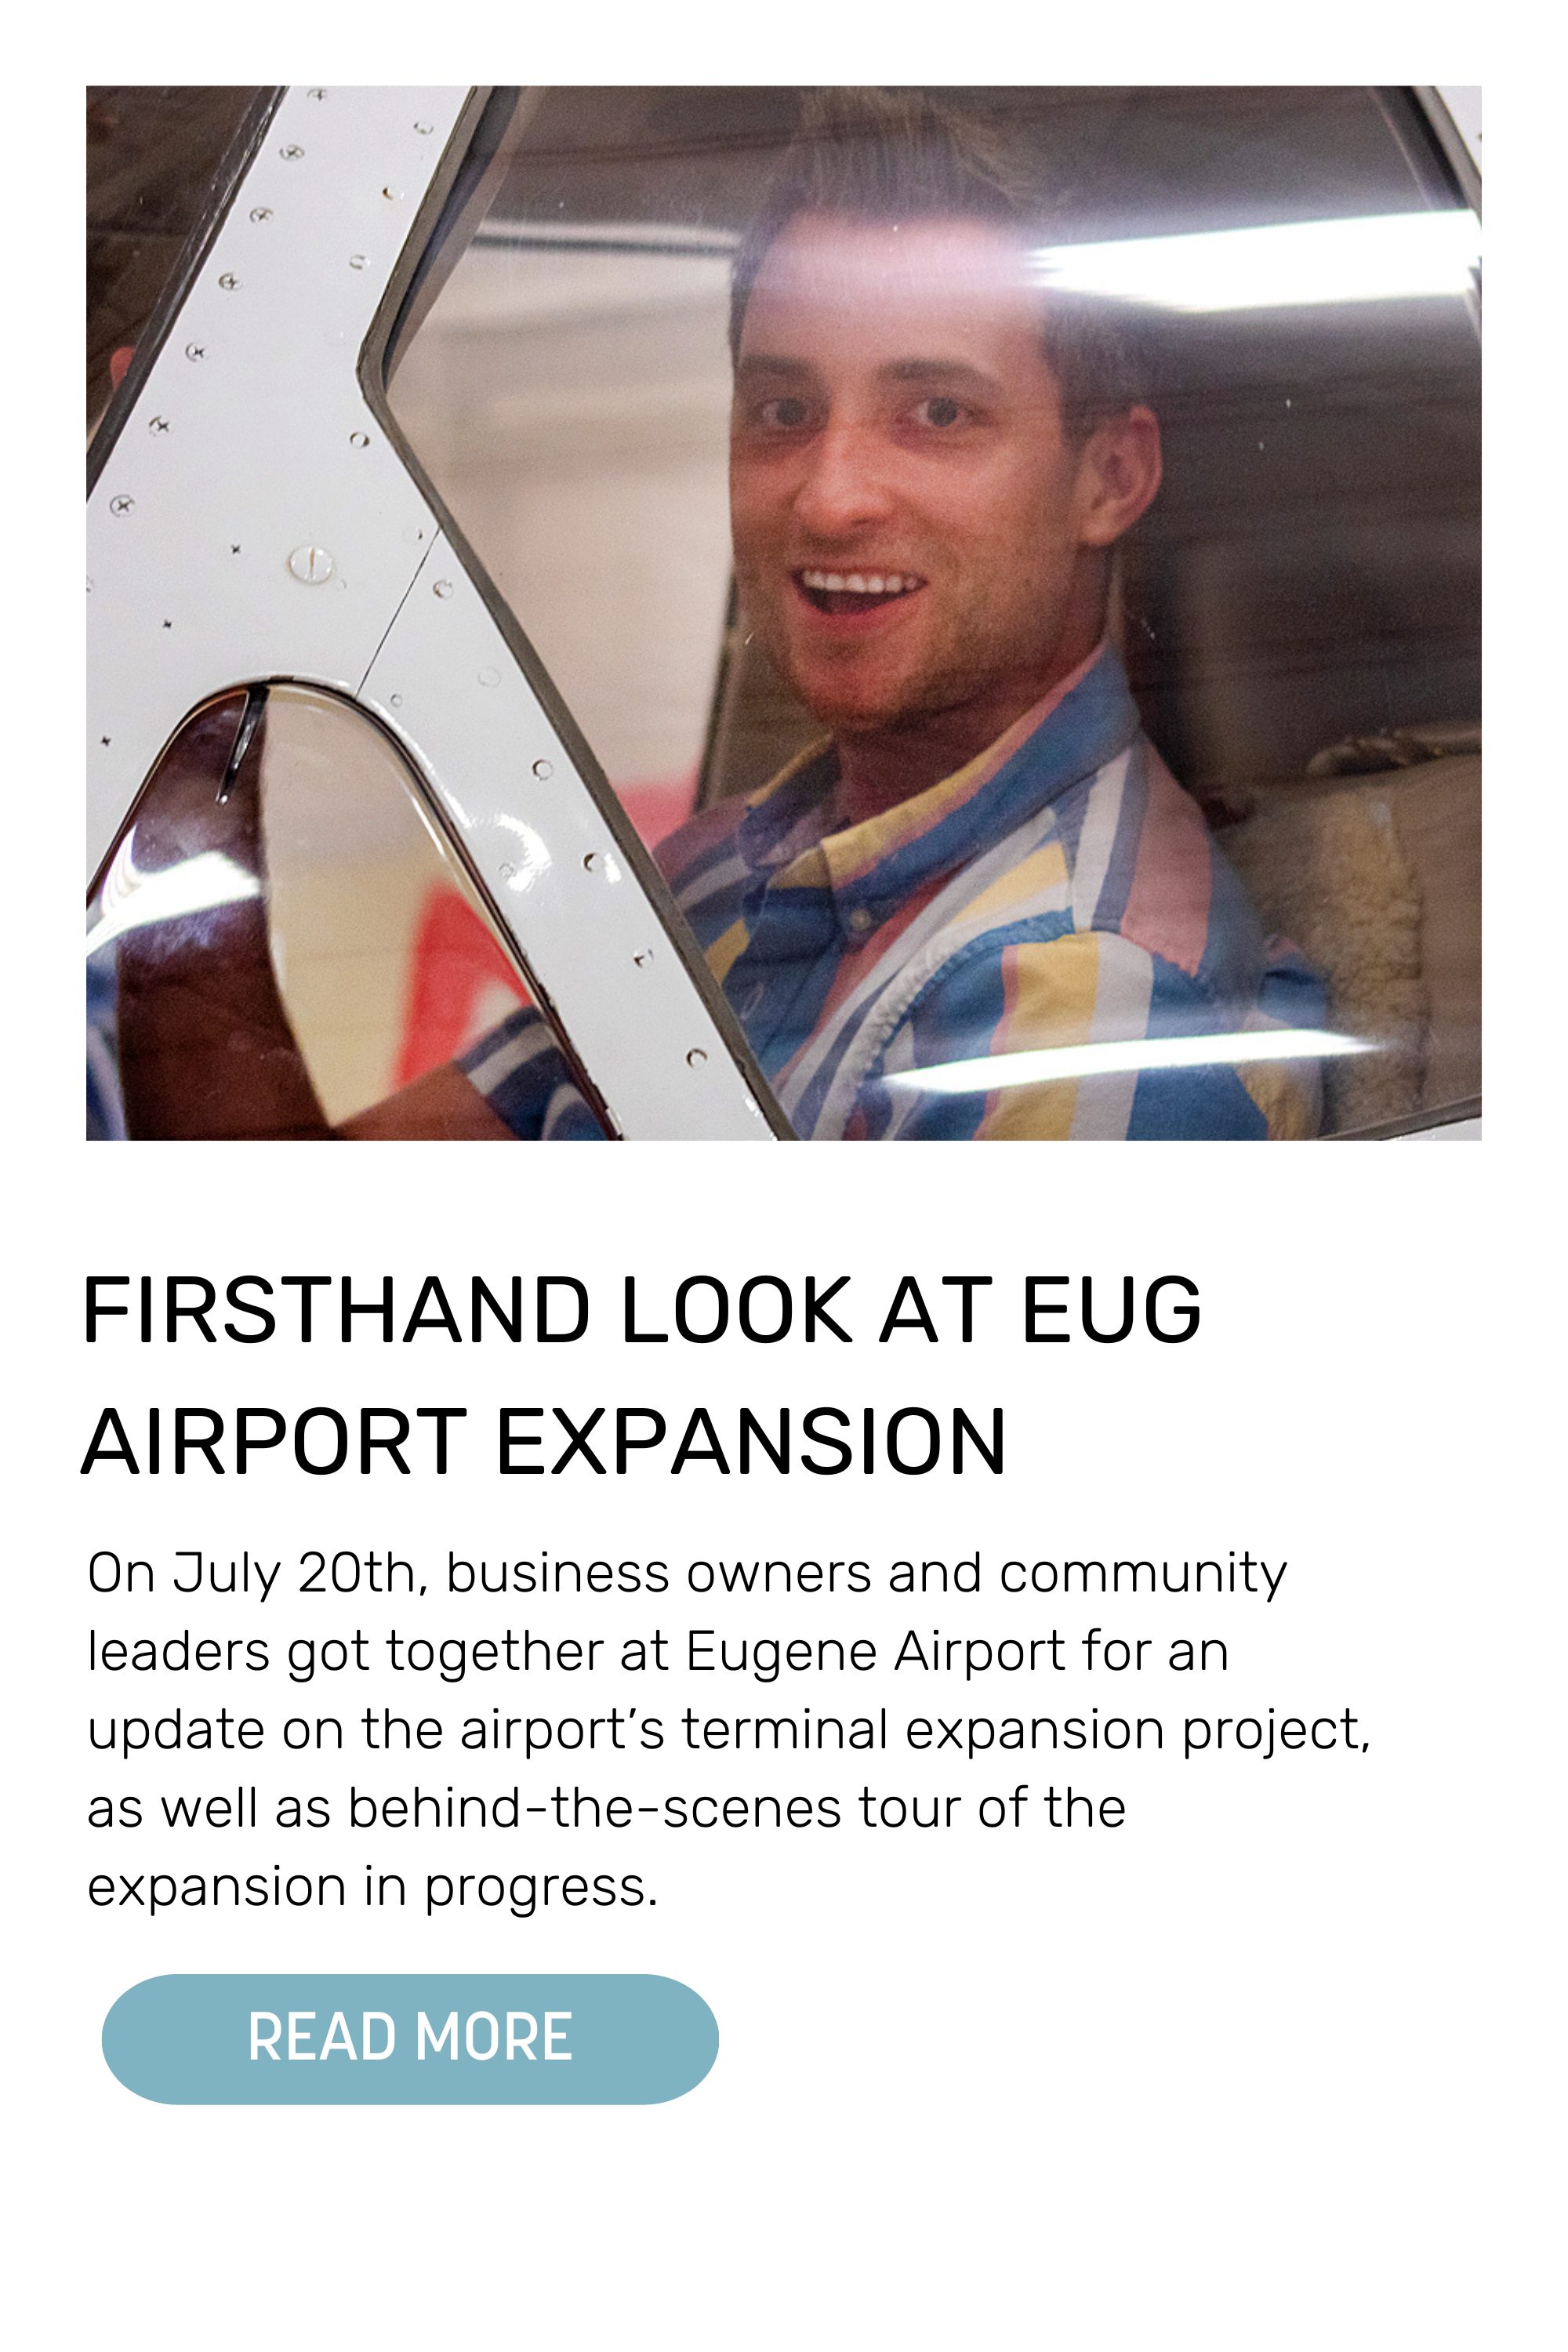 JULY CHAMBER ROUNDTABLE + TOUR ATTENDEES GET FIRSTHAND LOOK AT EUG AIRPORT EXPANSION